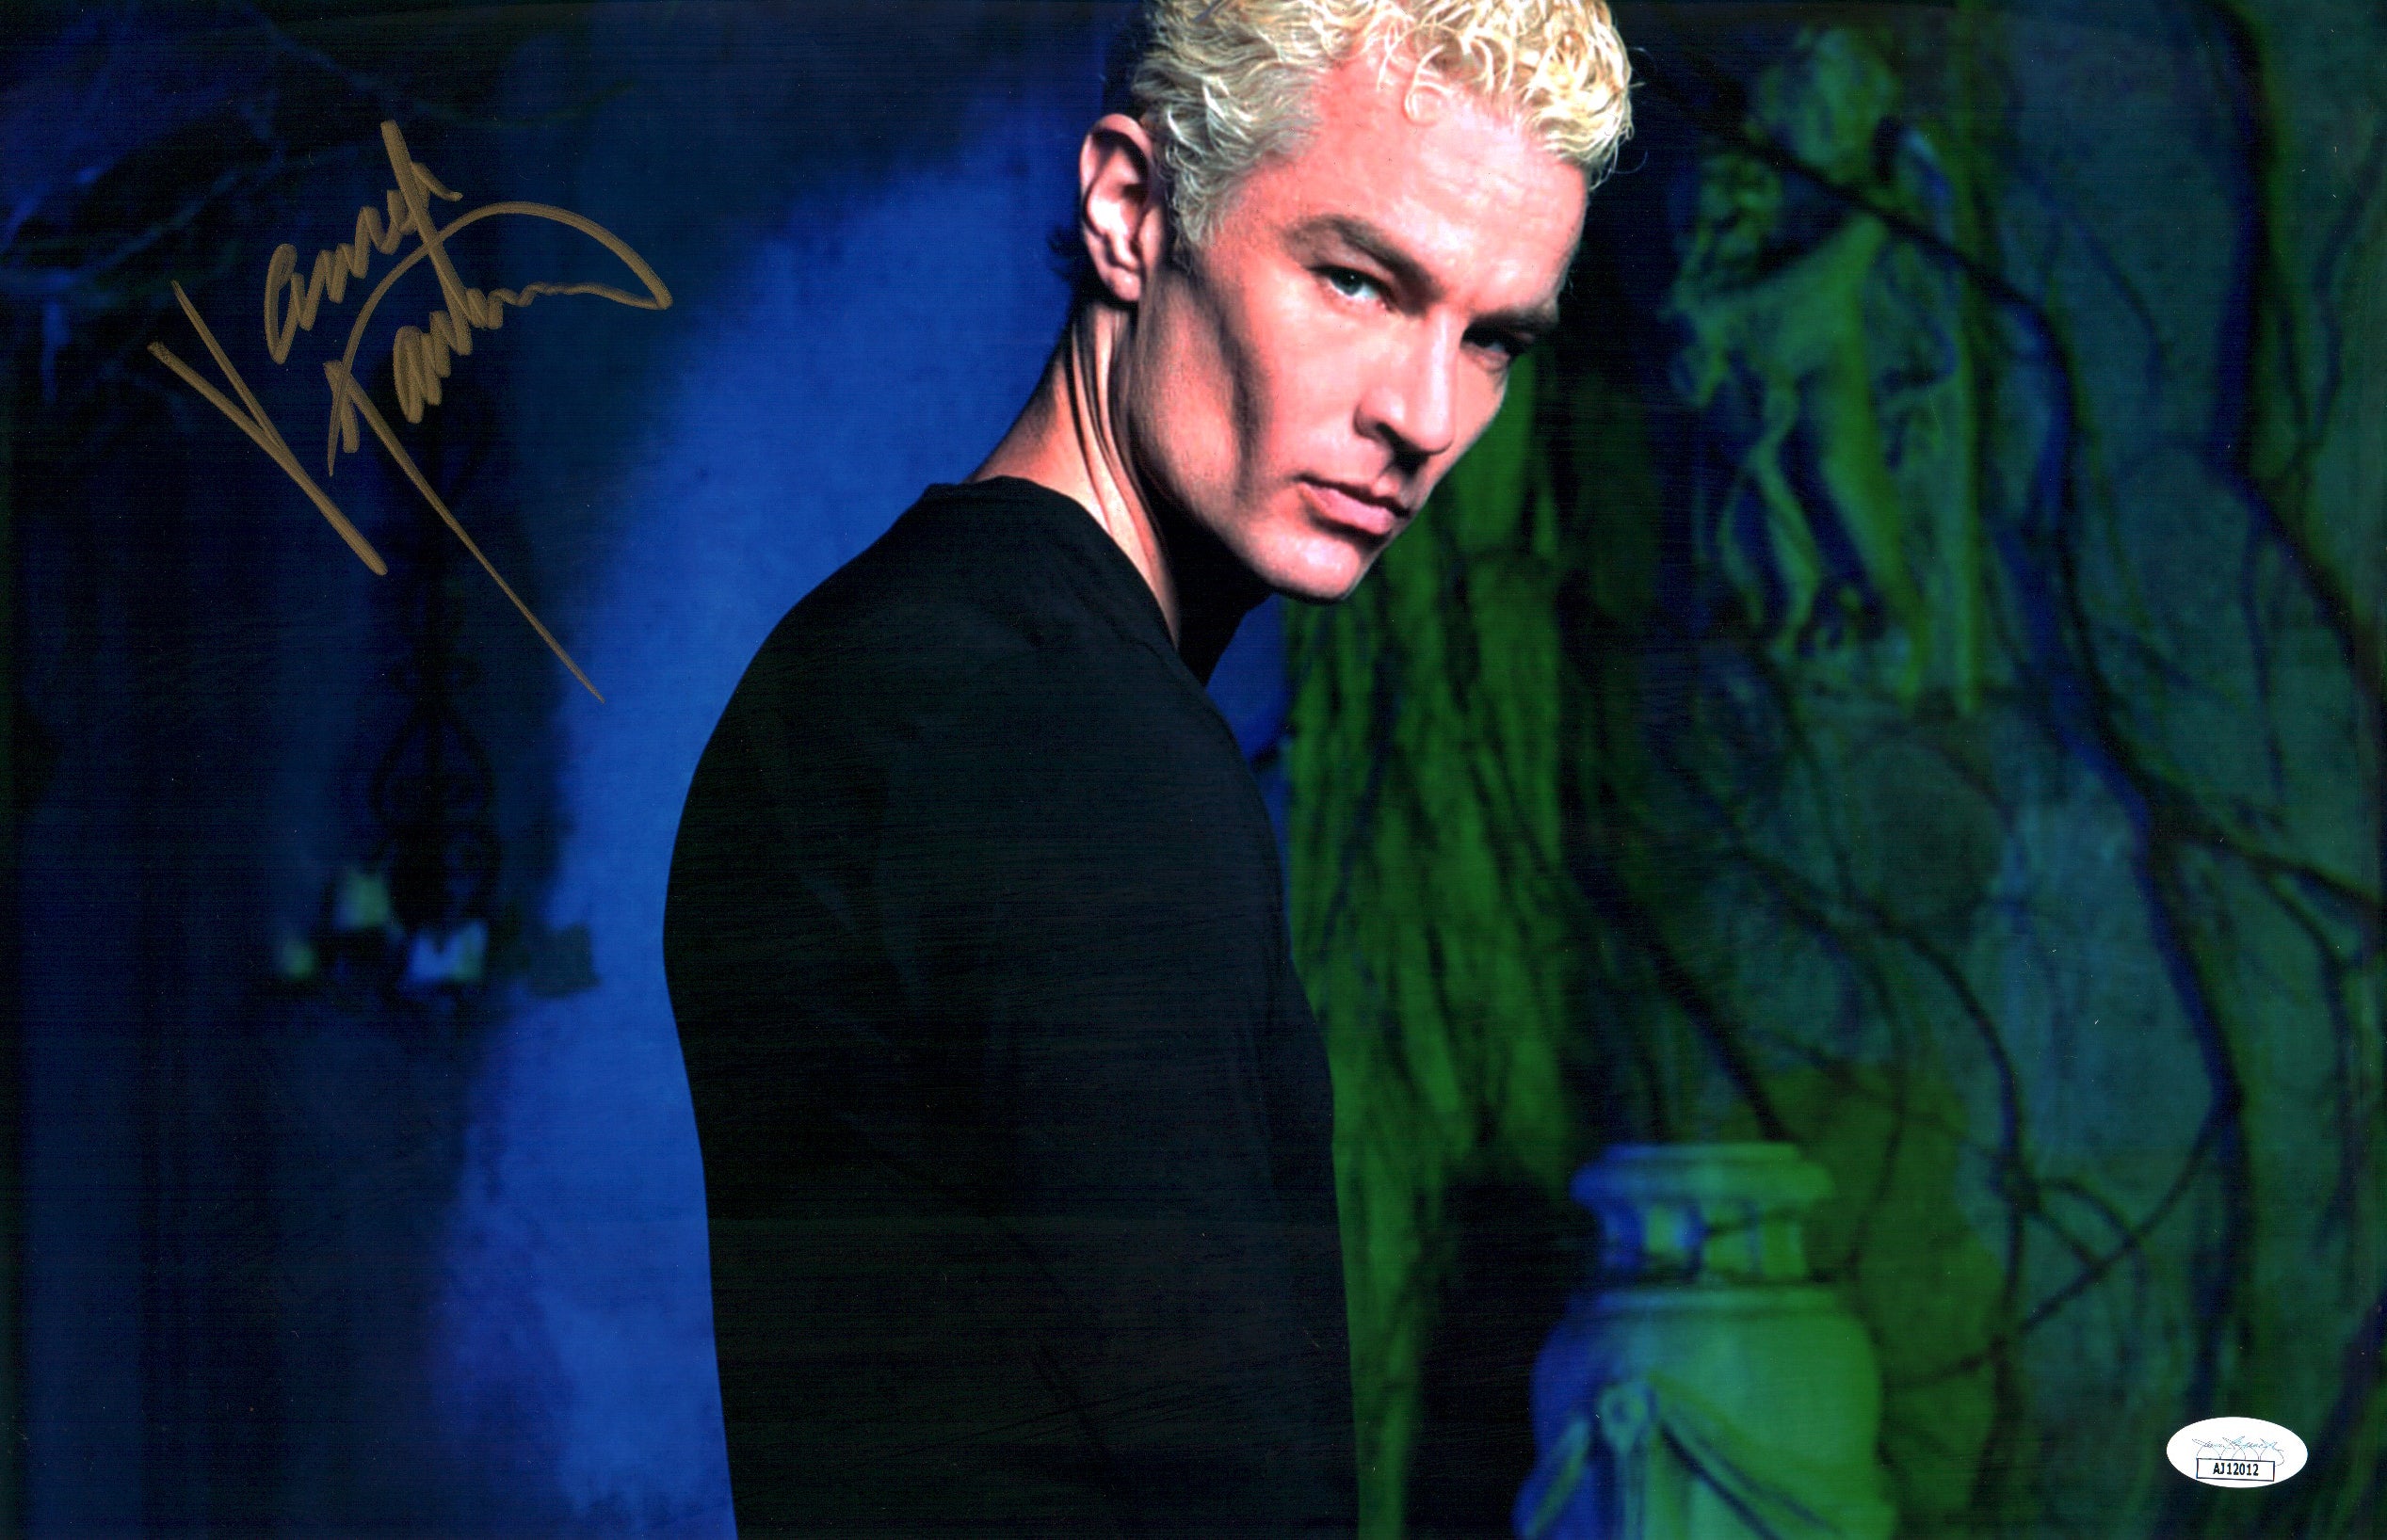 James Marsters Buffy the Vampire Slayer 11x17 Signed Photo Poster JSA COA Certified Autograph